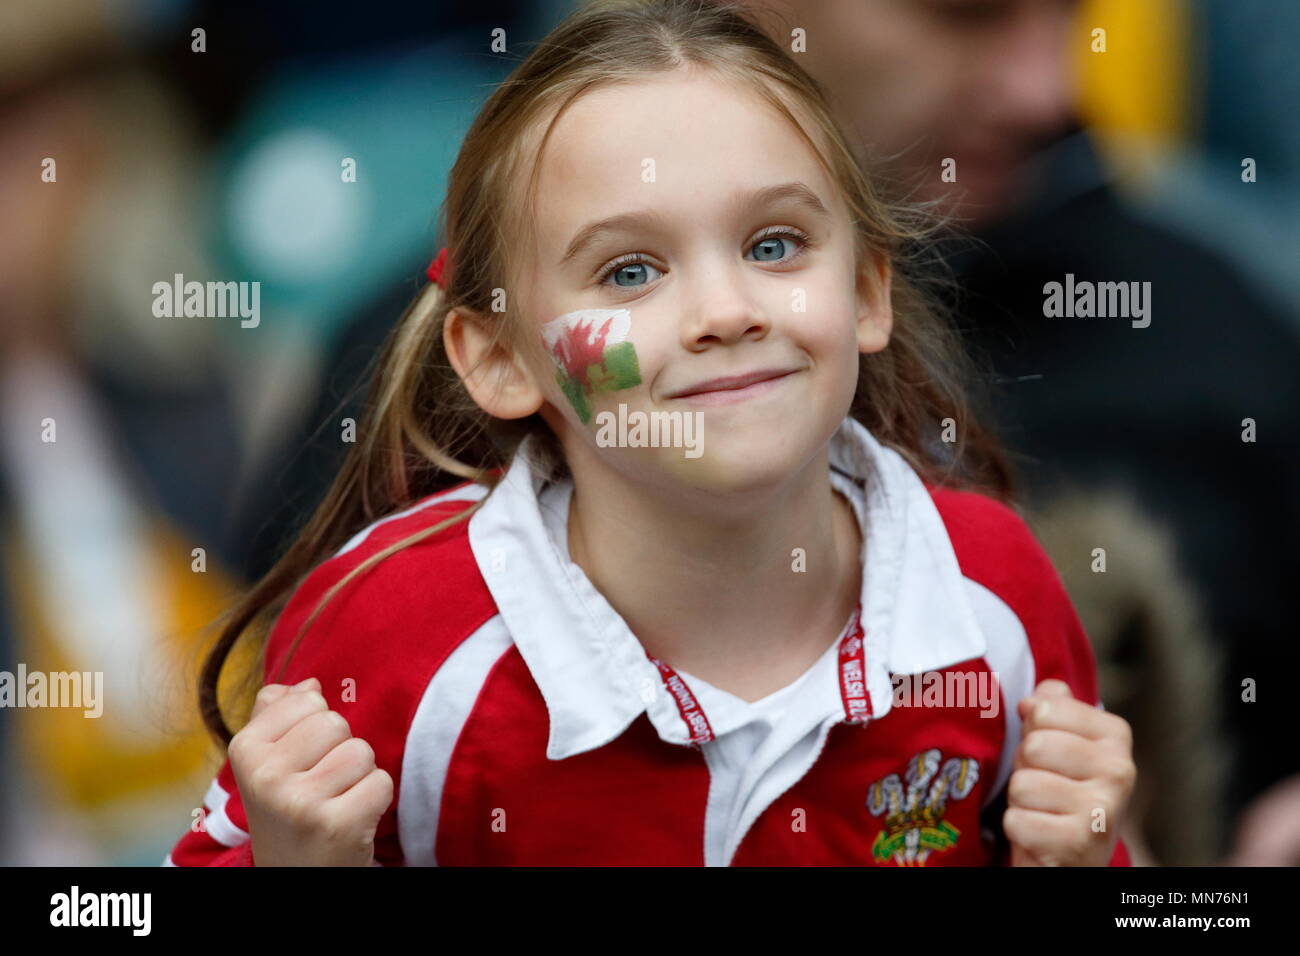 Fans of Wales in the crowd during the IRB RWC 2015 match between Wales v Australia - Pool A Match 35 at Twickenham Stadium. London, England. 10 October 2015 Stock Photo